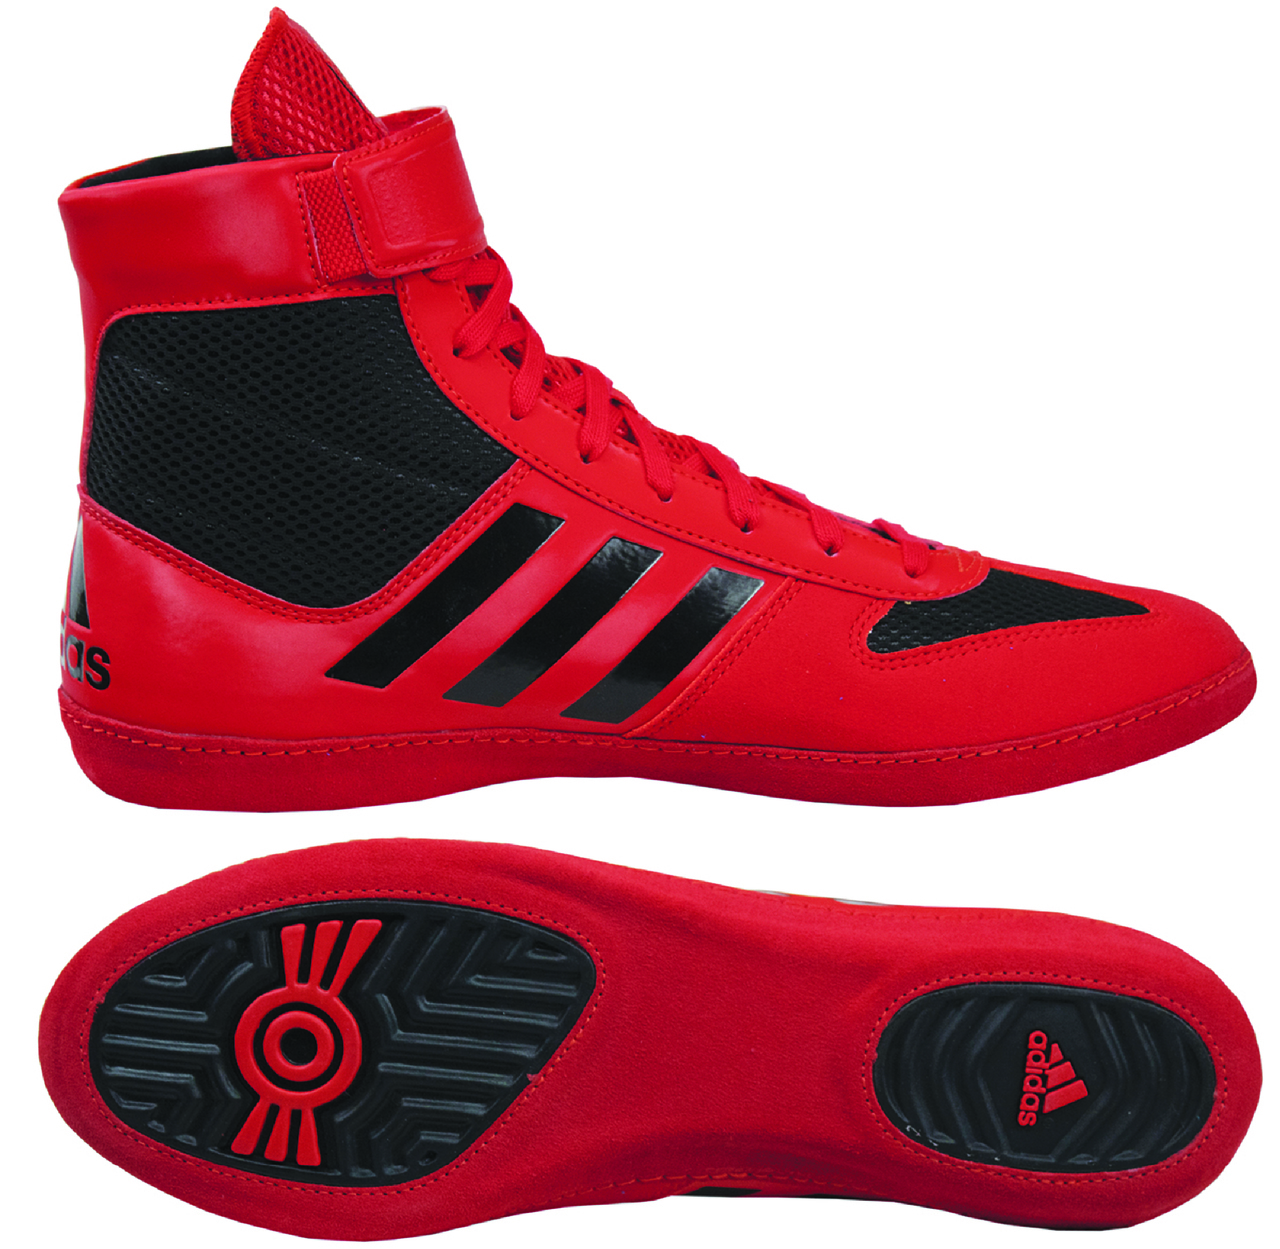 Adidas Combat Speed 5 Wrestling Shoes, color: Red/Black